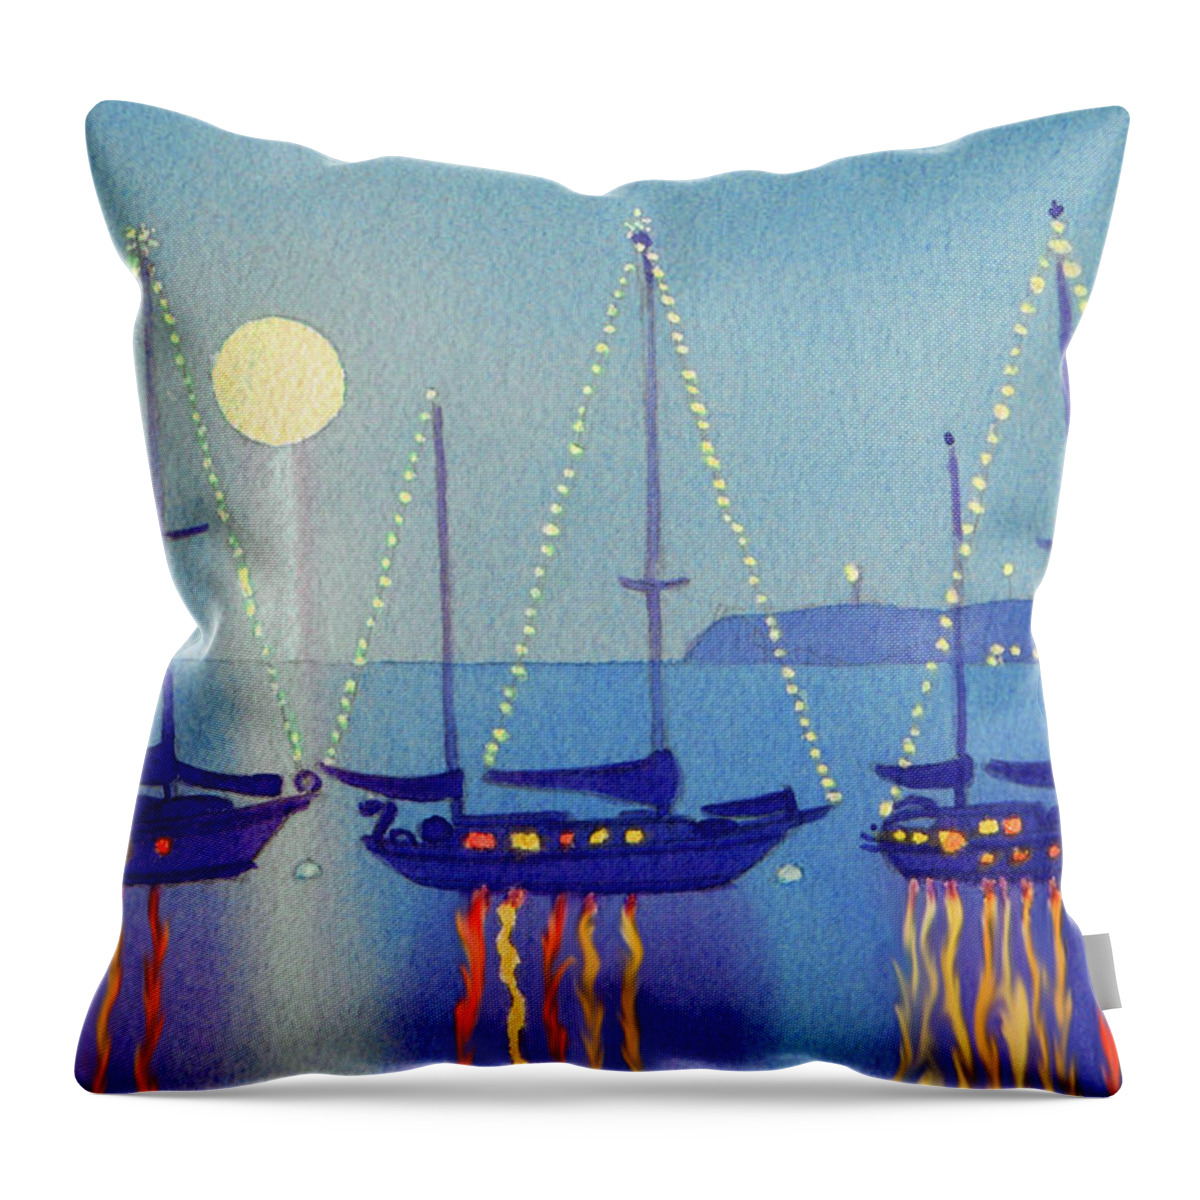 Coronado Throw Pillow featuring the painting Coronado Christmas Boats by Mary Helmreich